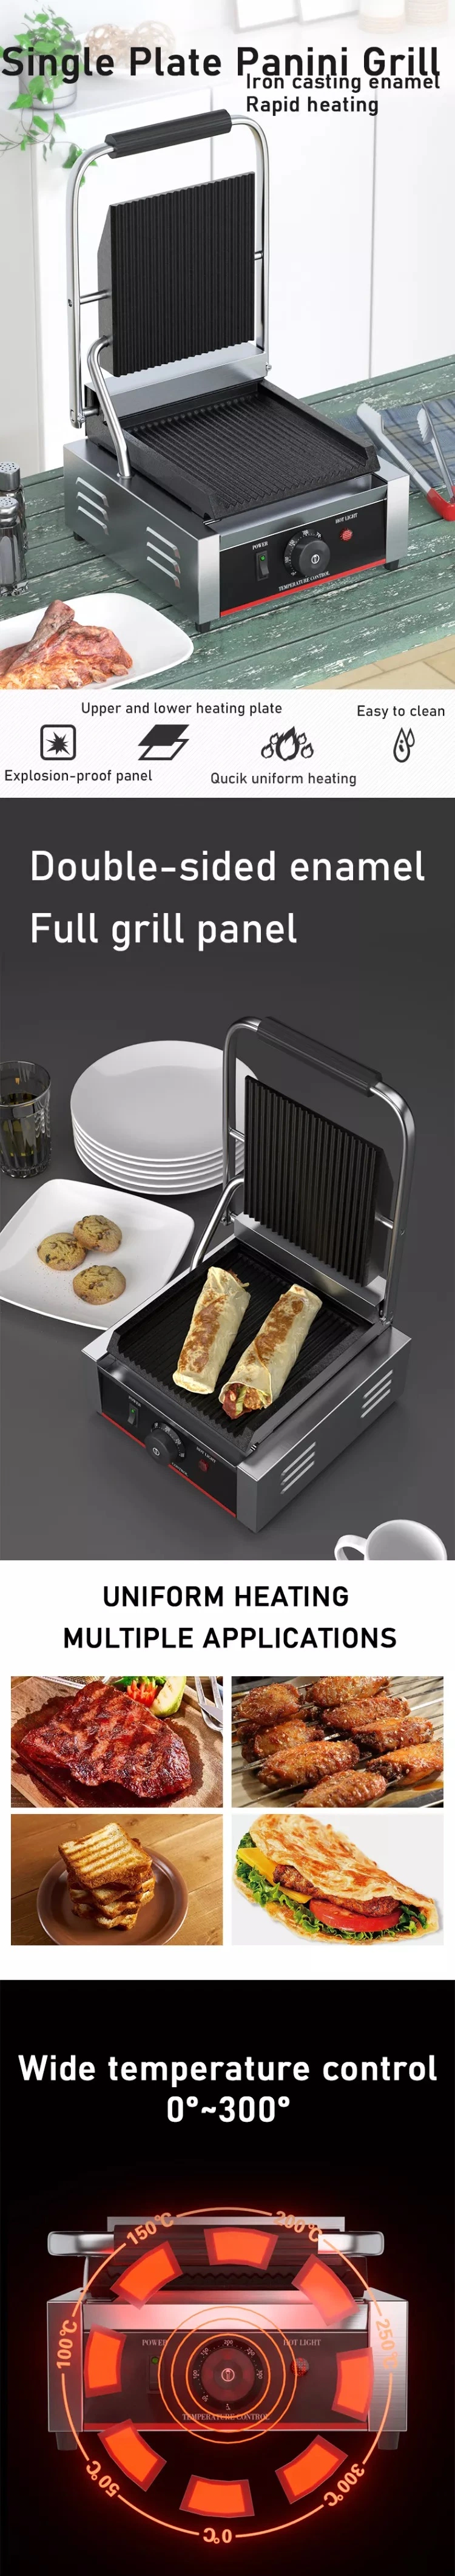 Contact Grill Professionnel Electric Sandwich Maker Griddle Contact Panini Press Grill 811